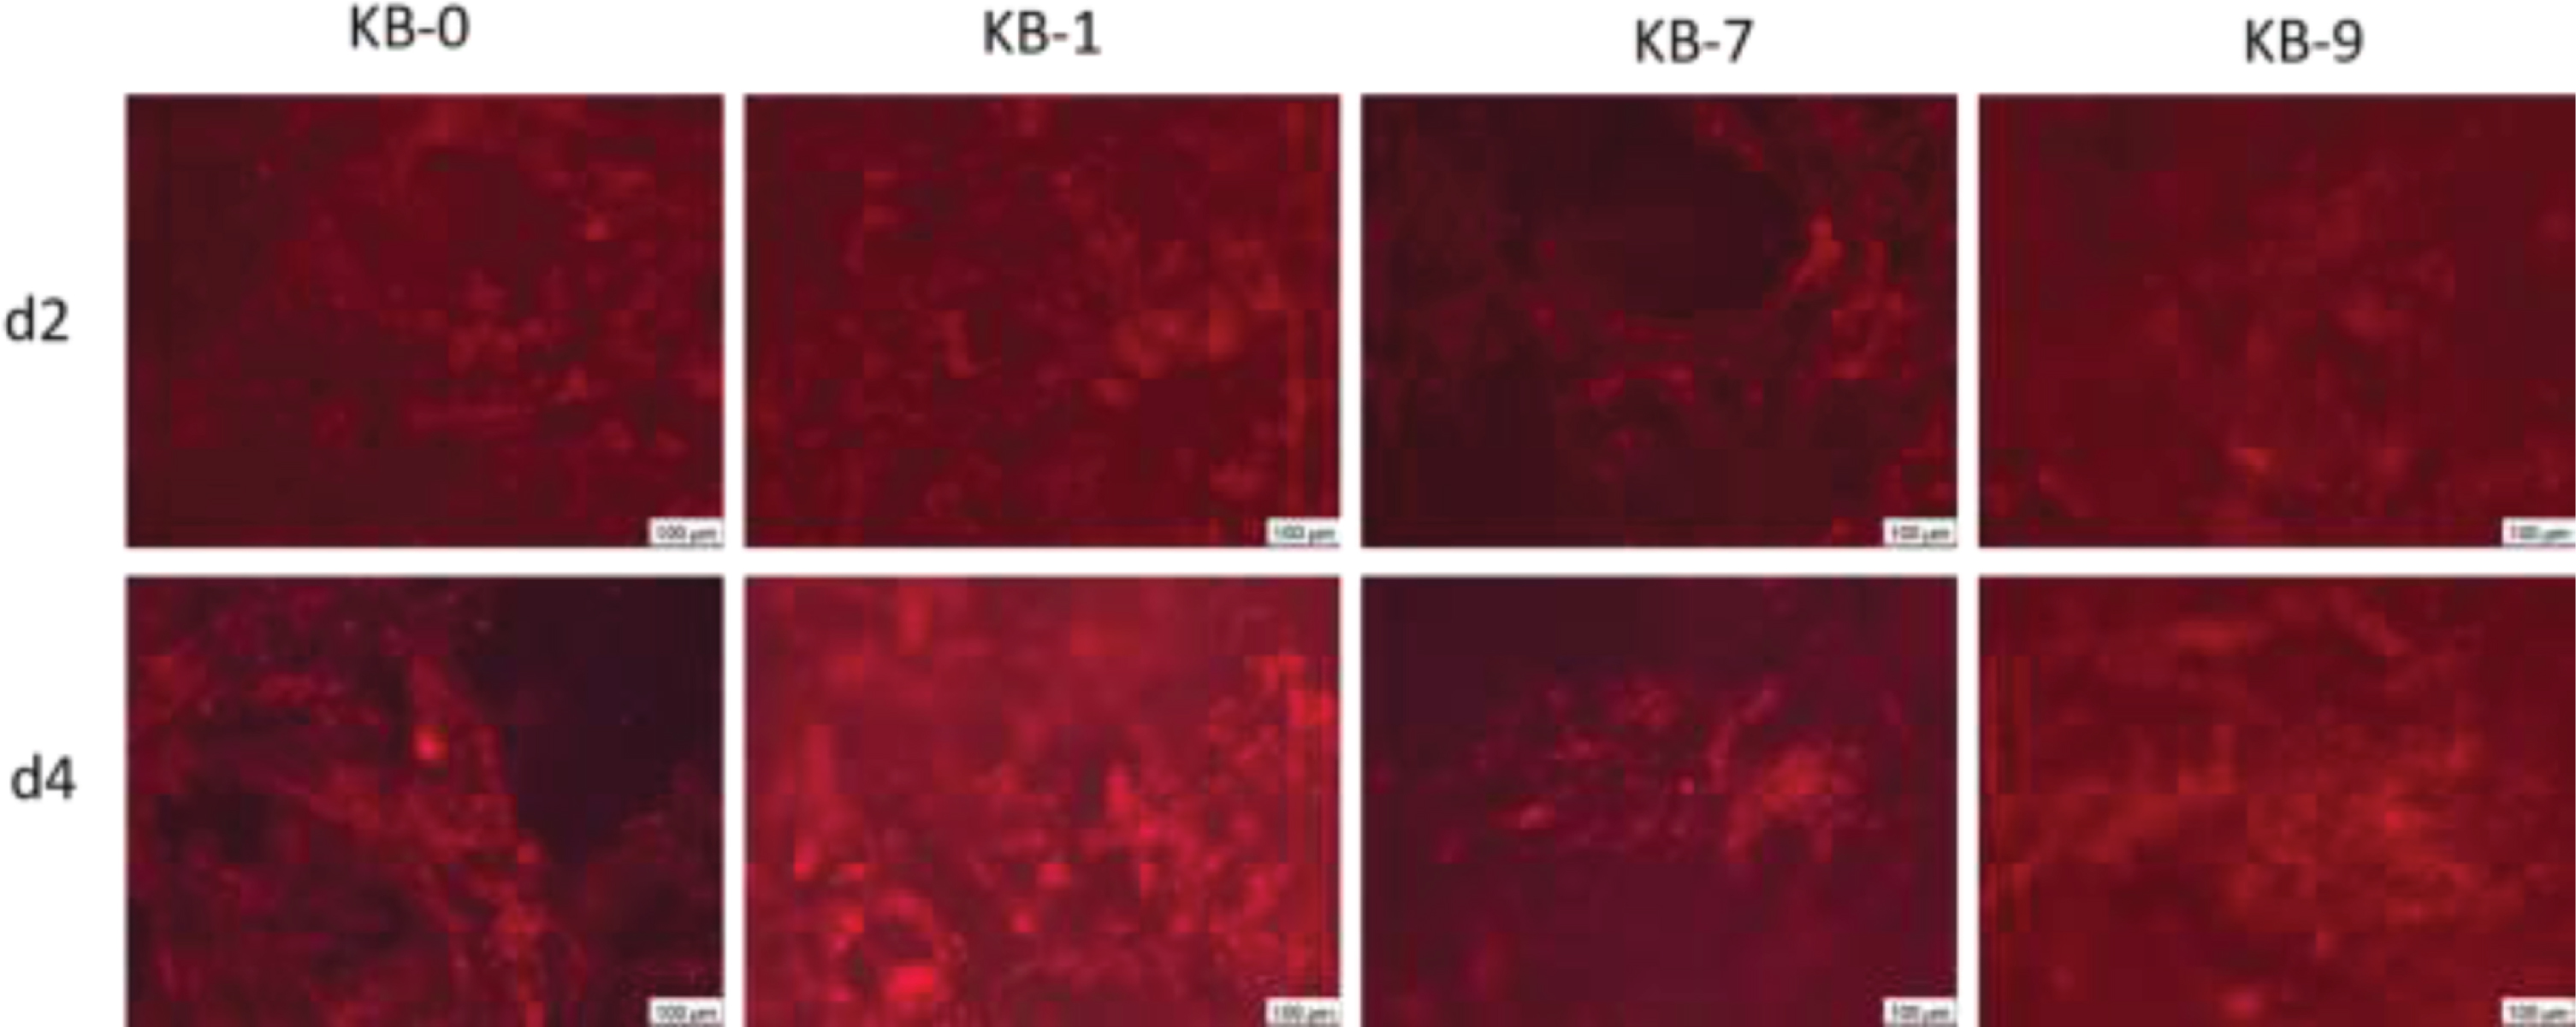 Representative images of CHO cells 48 and 96 h after cell seeding on cellulose based material surfaces. Wide-field fluorescence microscopy, 10x primary magnification. CHO cells are stained using phalloidin (red).